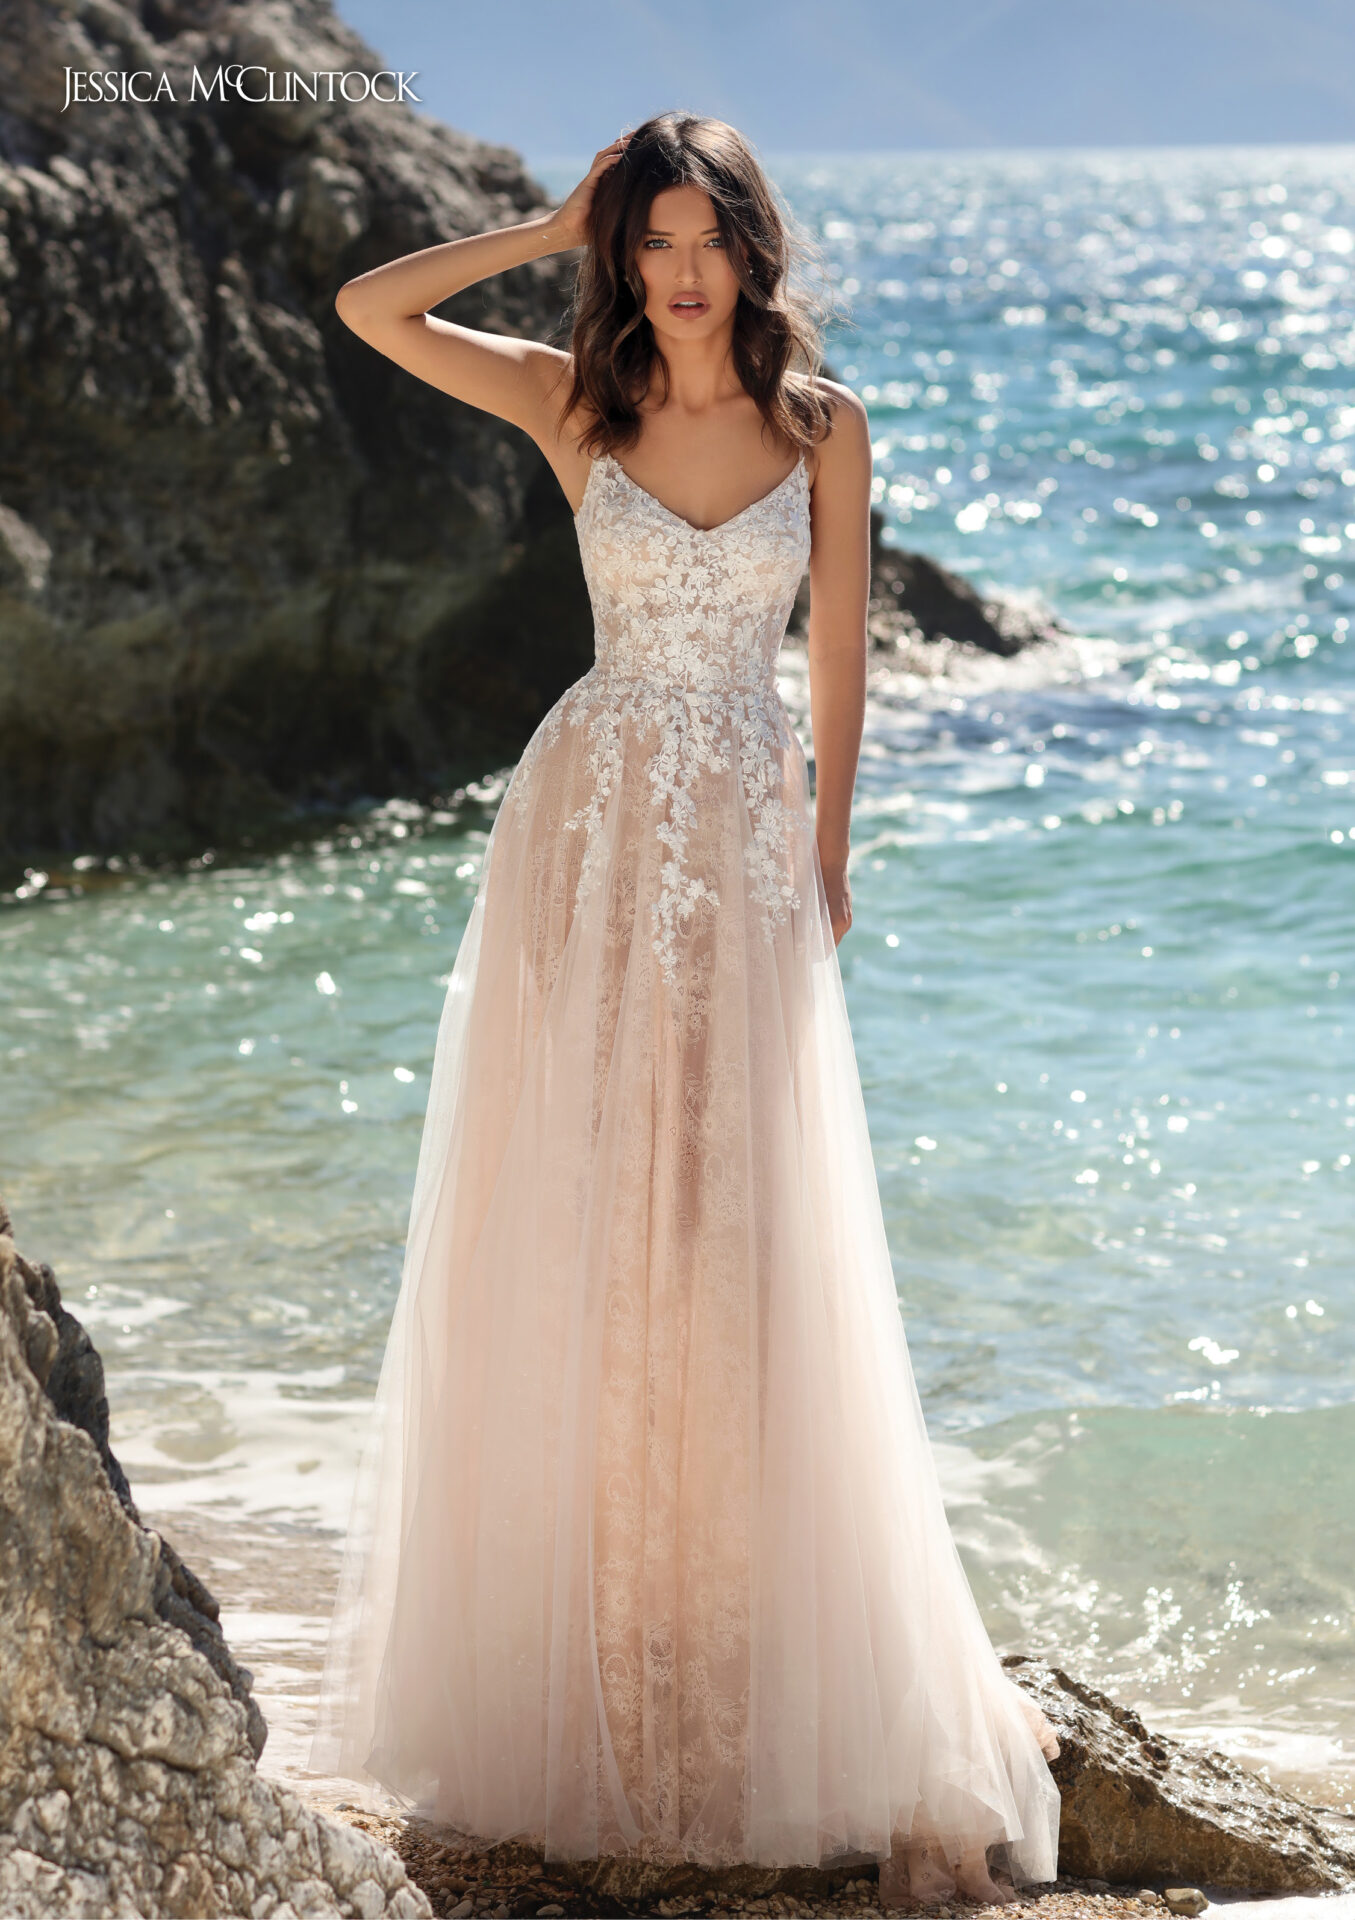 Woman in bridal gown stands on beach.